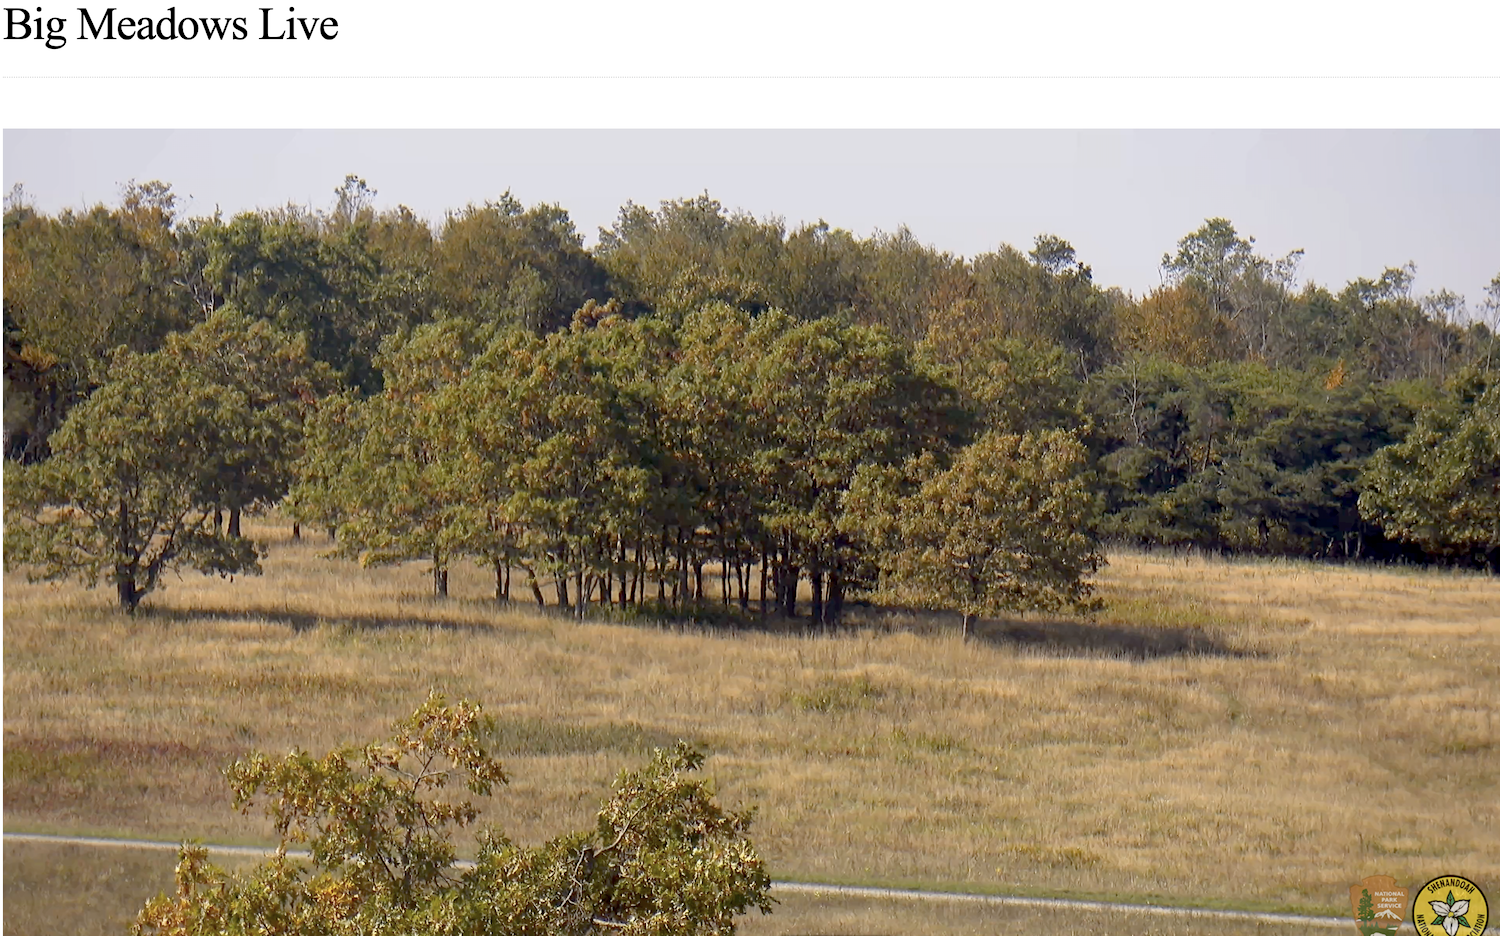 The view Tuesday, October 3, from the Big Meadows webcam/NPS, Shenandoah National Park Association